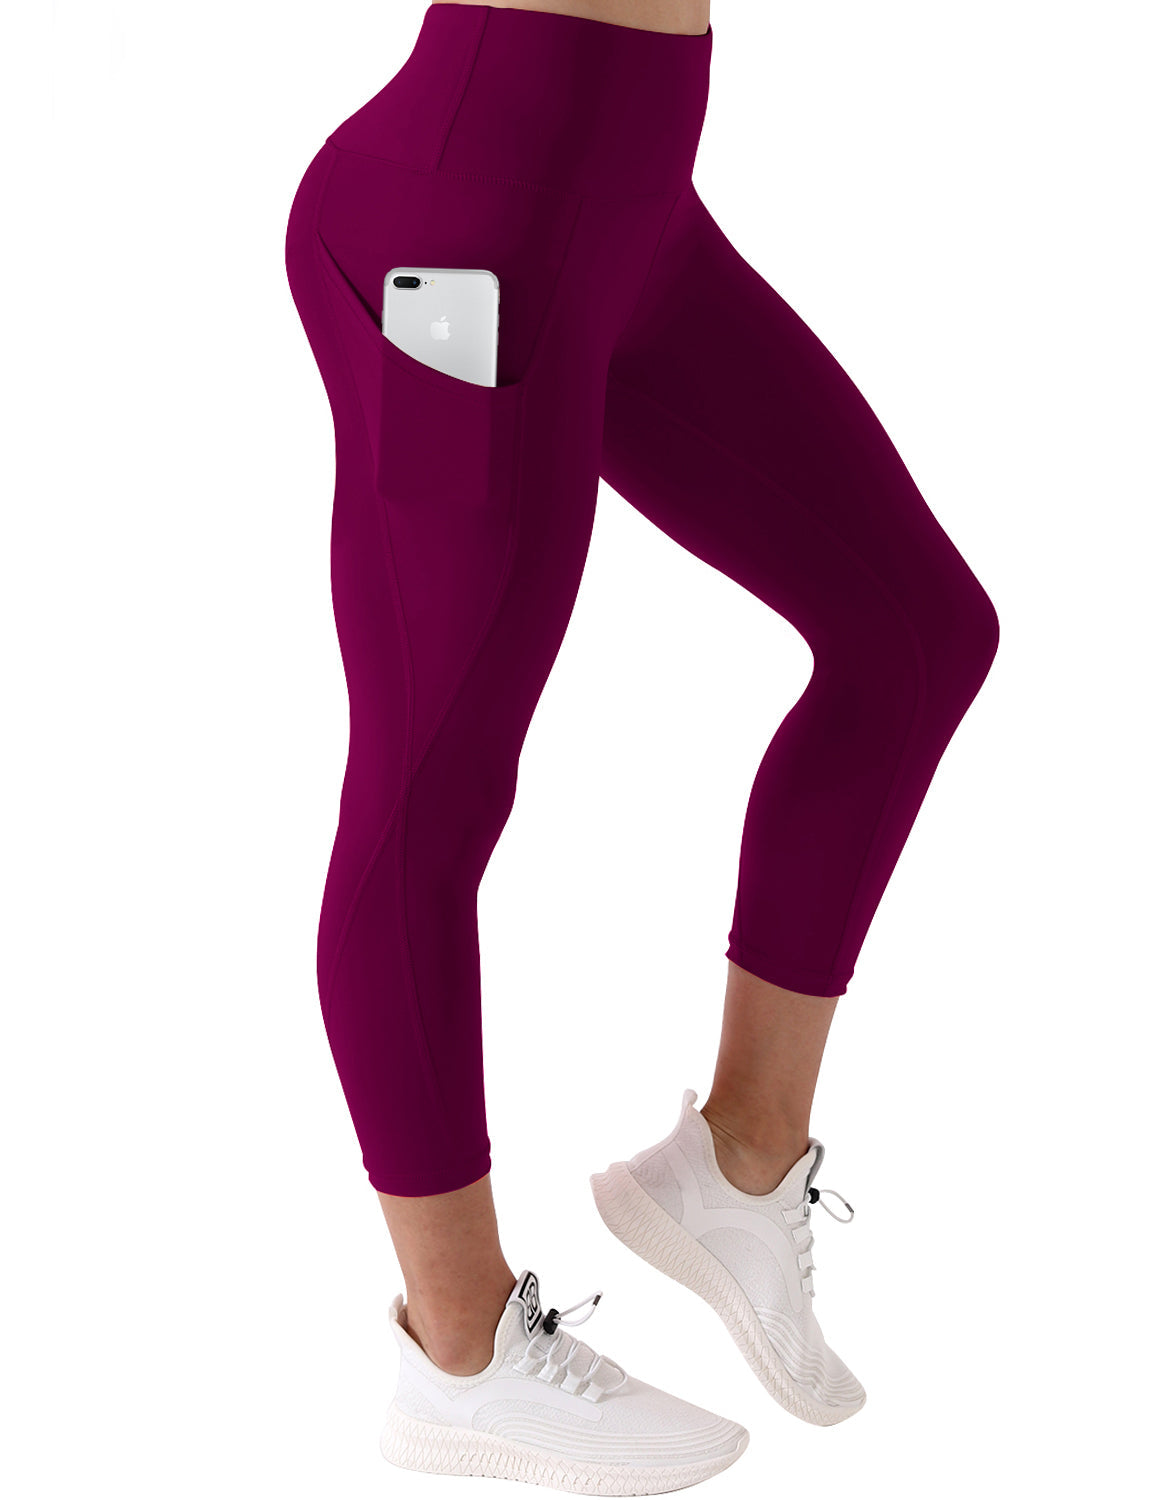 22" High Waist Side Pockets Capris grapevine 75%Nylon/25%Spandex Fabric doesn't attract lint easily 4-way stretch No see-through Moisture-wicking Tummy control Inner pocket